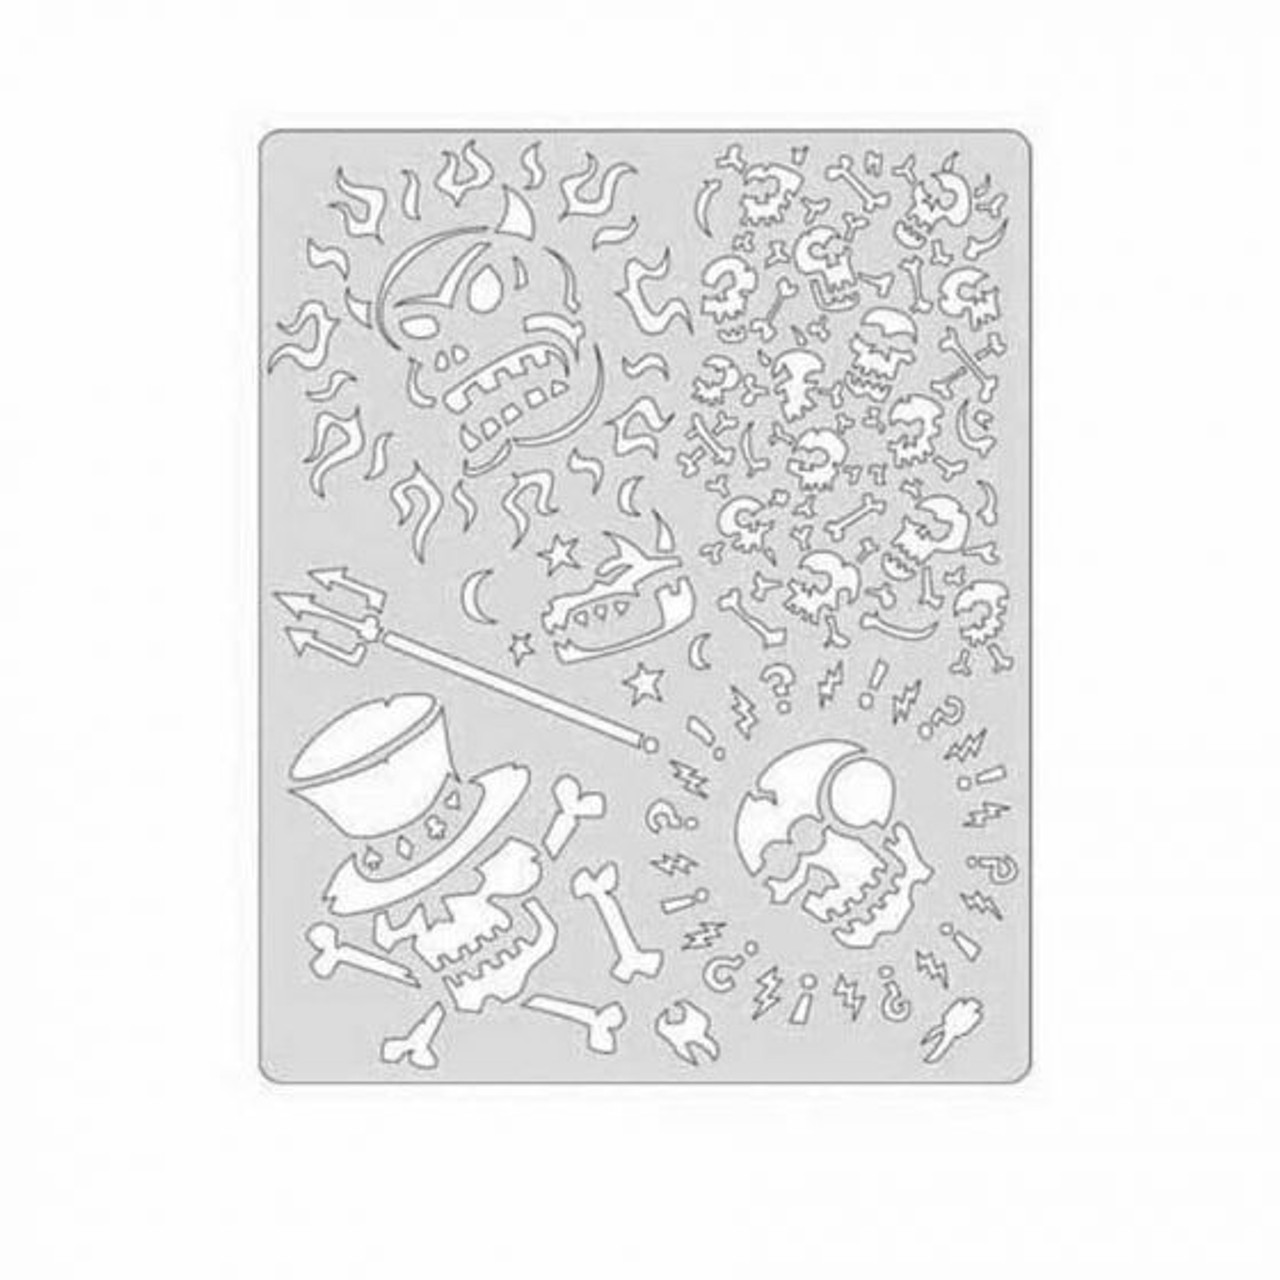 ANEST IWATA Artool? FH-SK13SP Curse of Skullmaster Series Voo Doo Freehand Airbrush Template, 10 in L x 8 in W